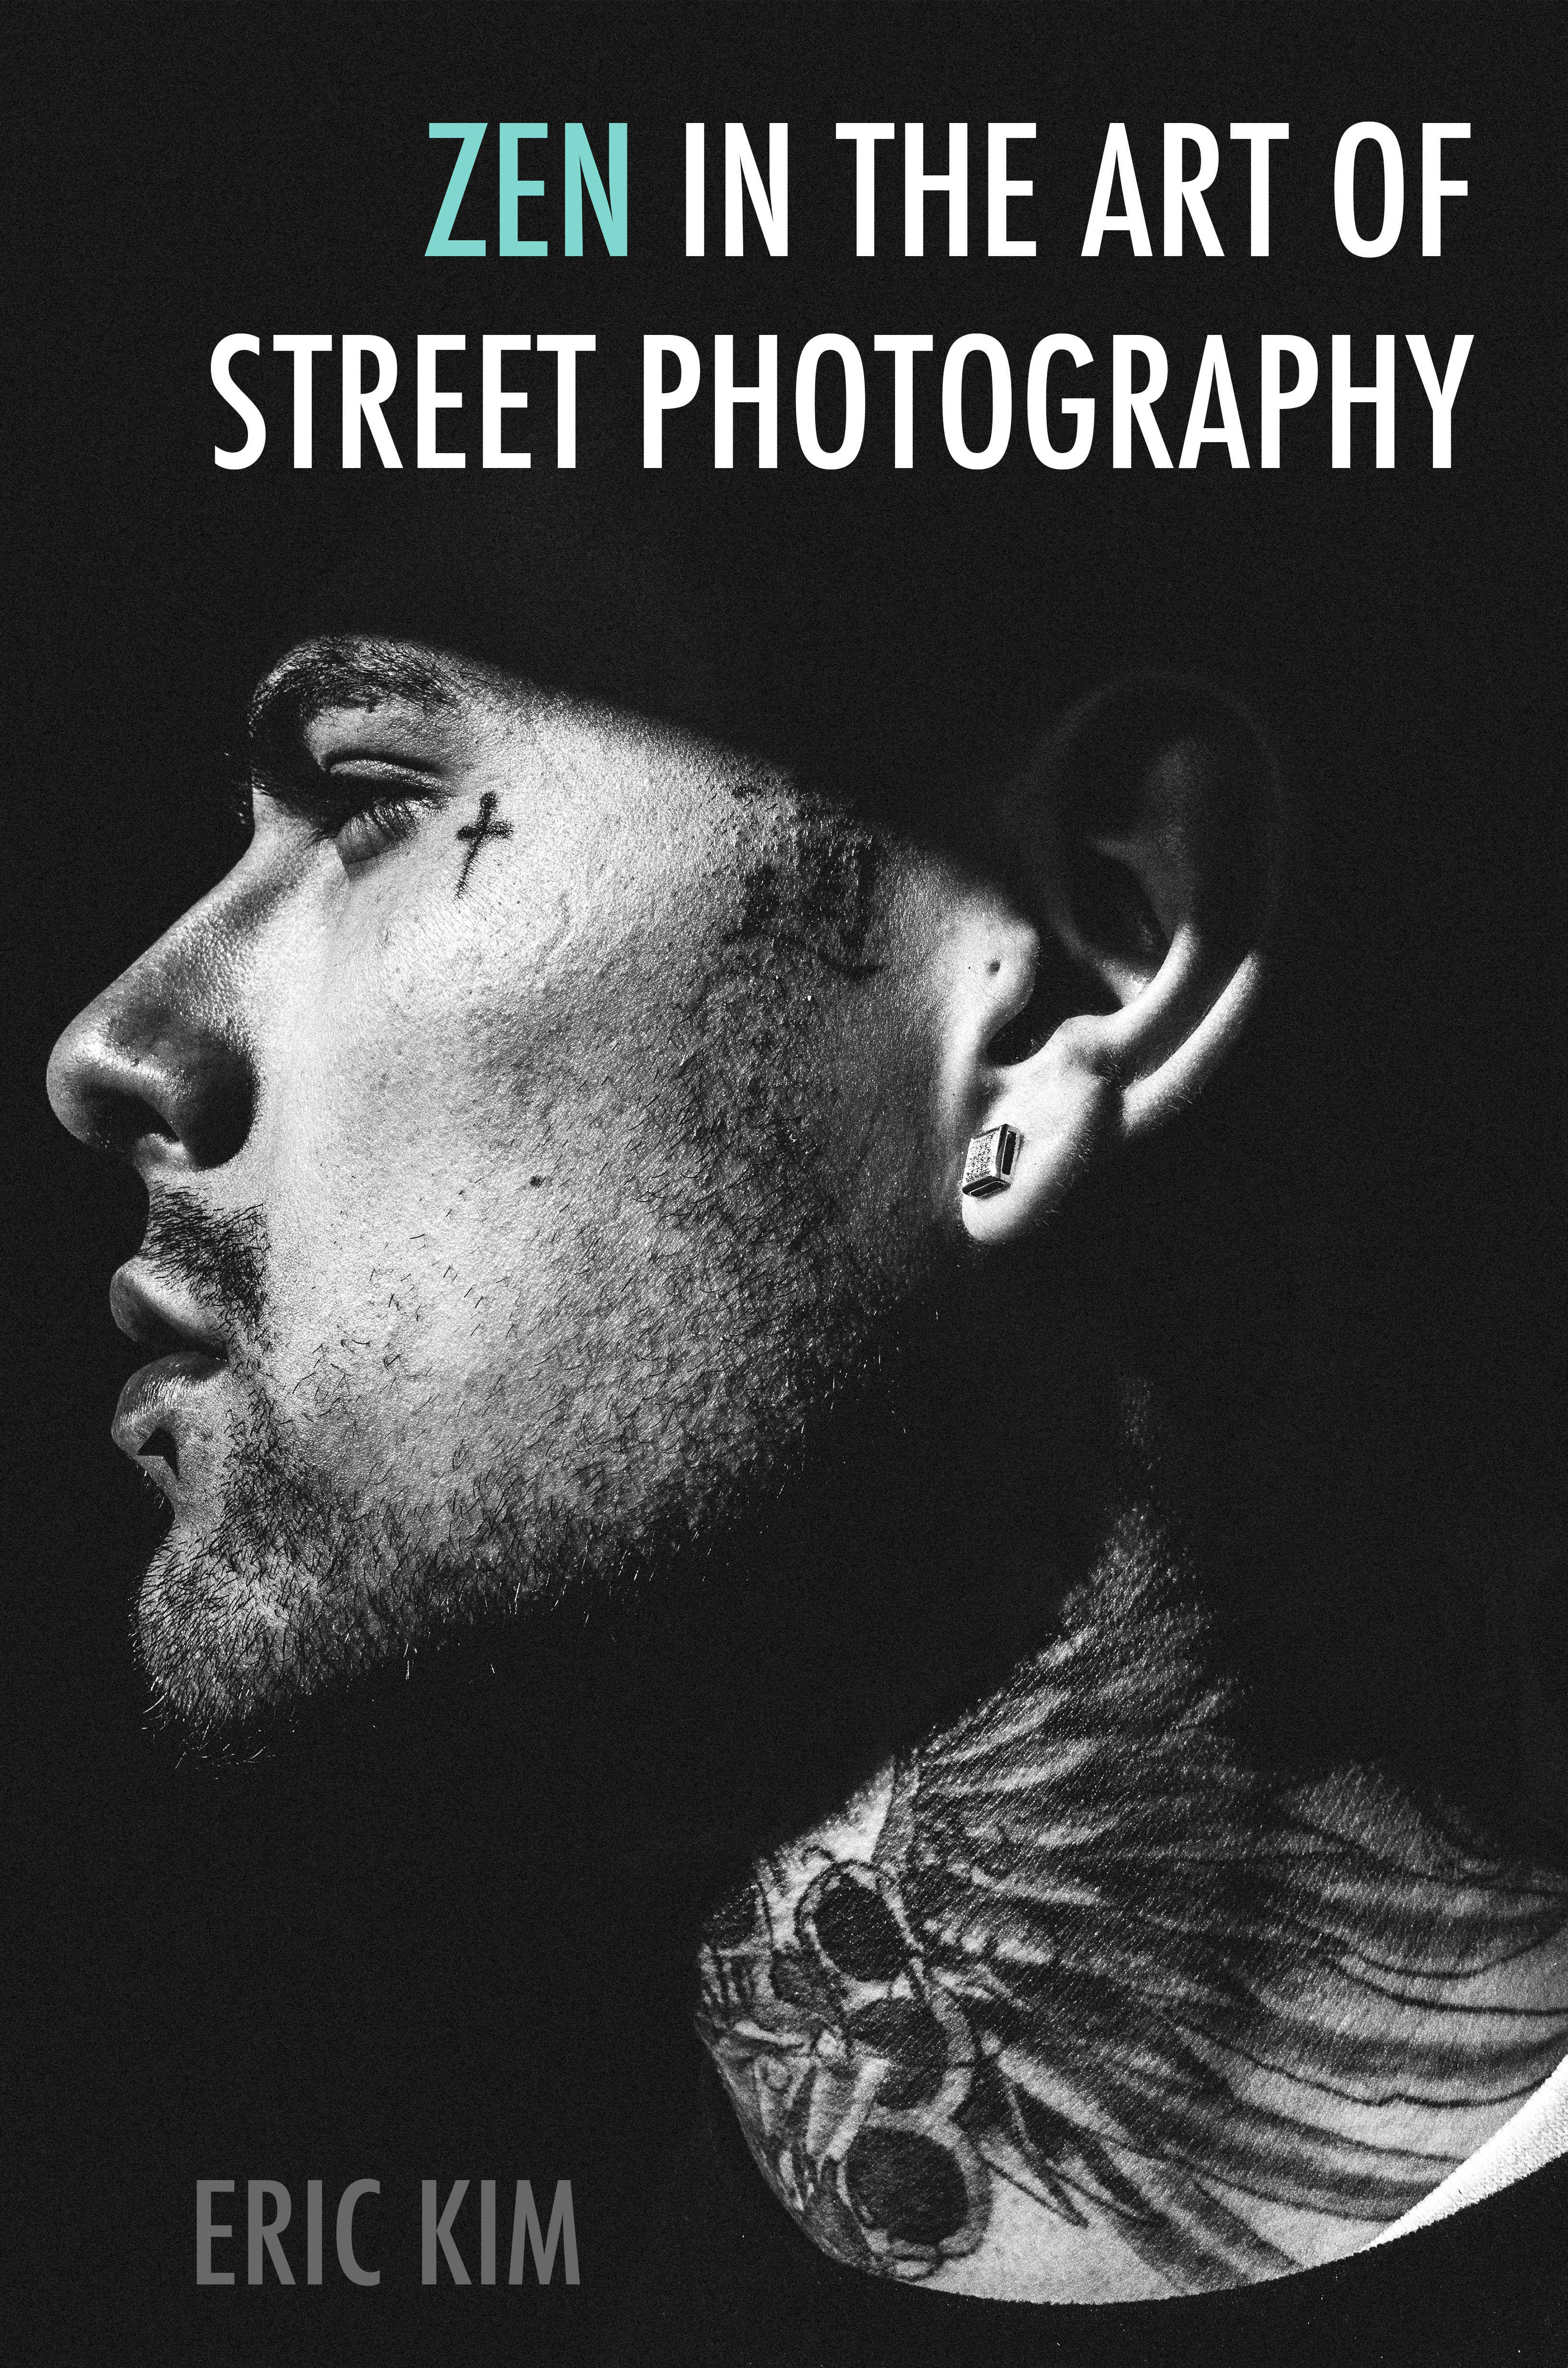 Free E-Book: Zen in the Art of Street Photography